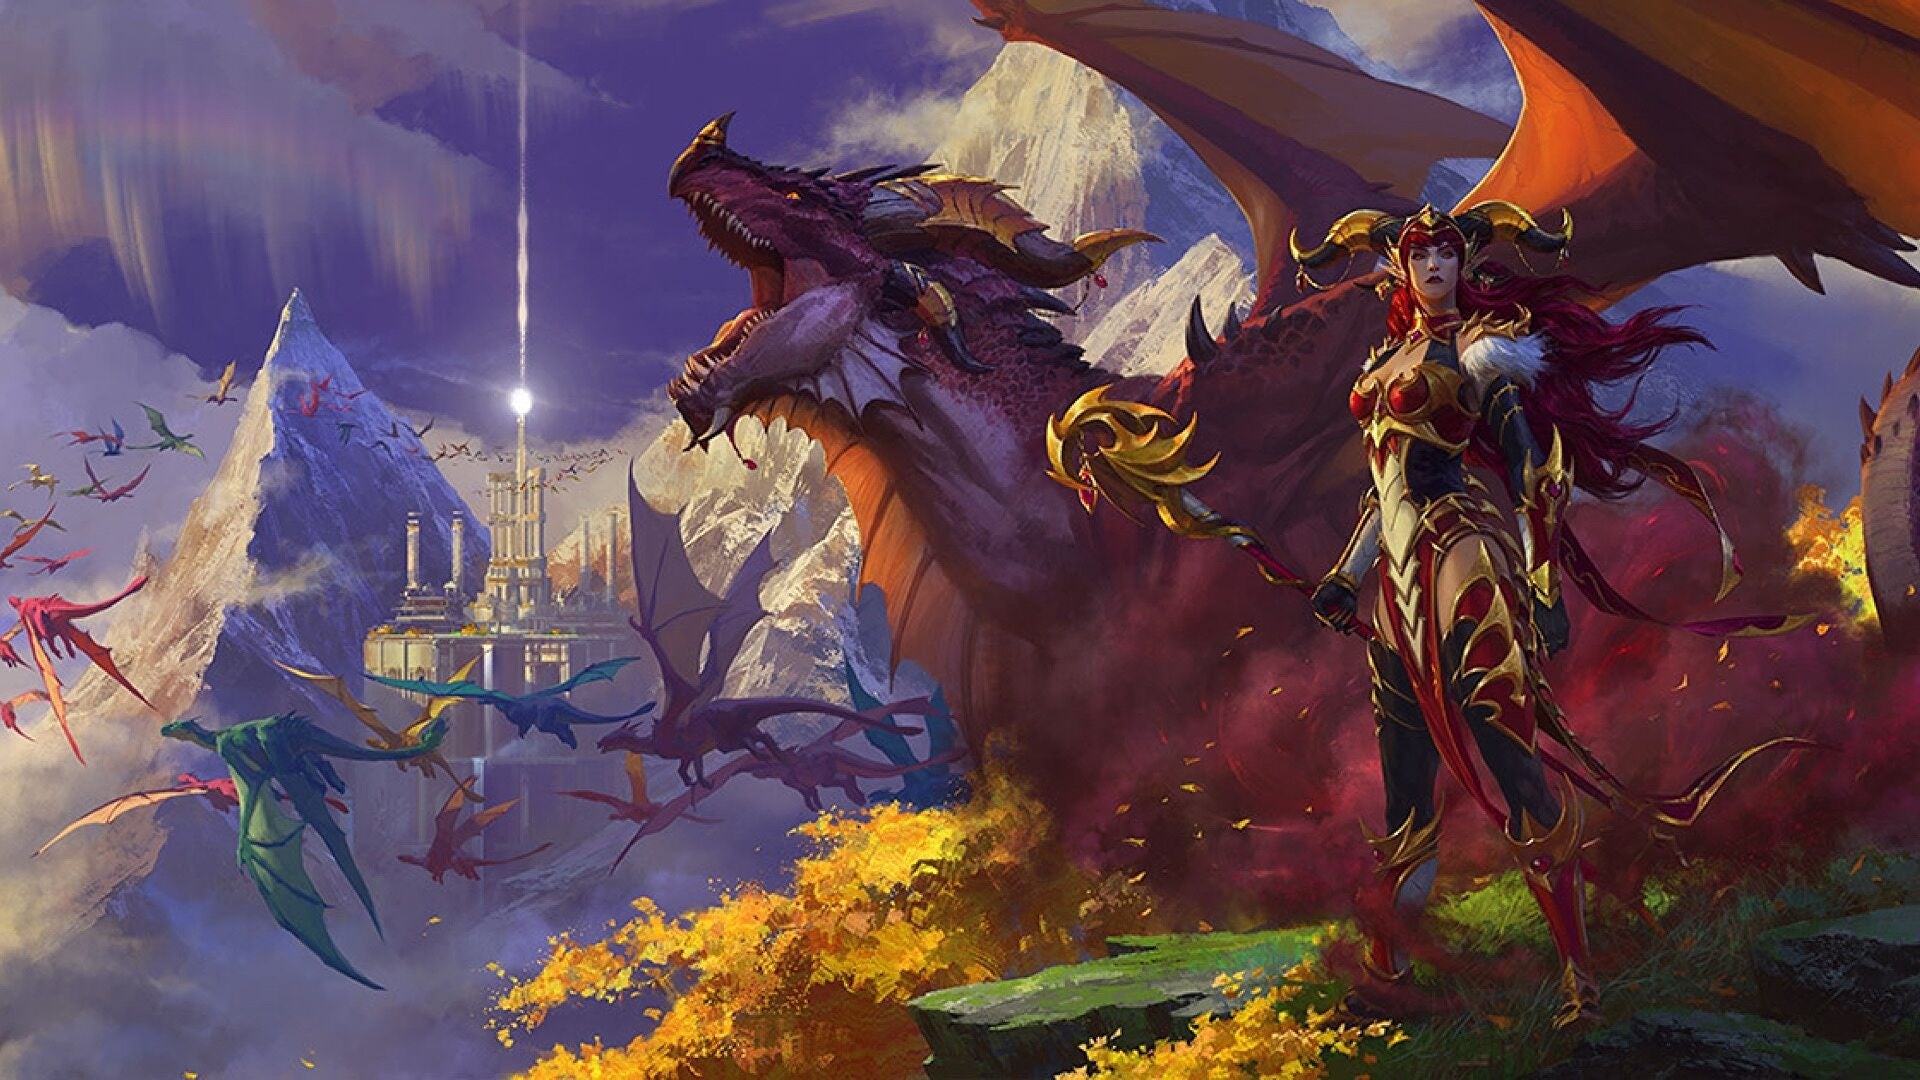 World Of Warcraft: Dragonflight is an expansion launching in November 2022 for the ageing MMORPG.